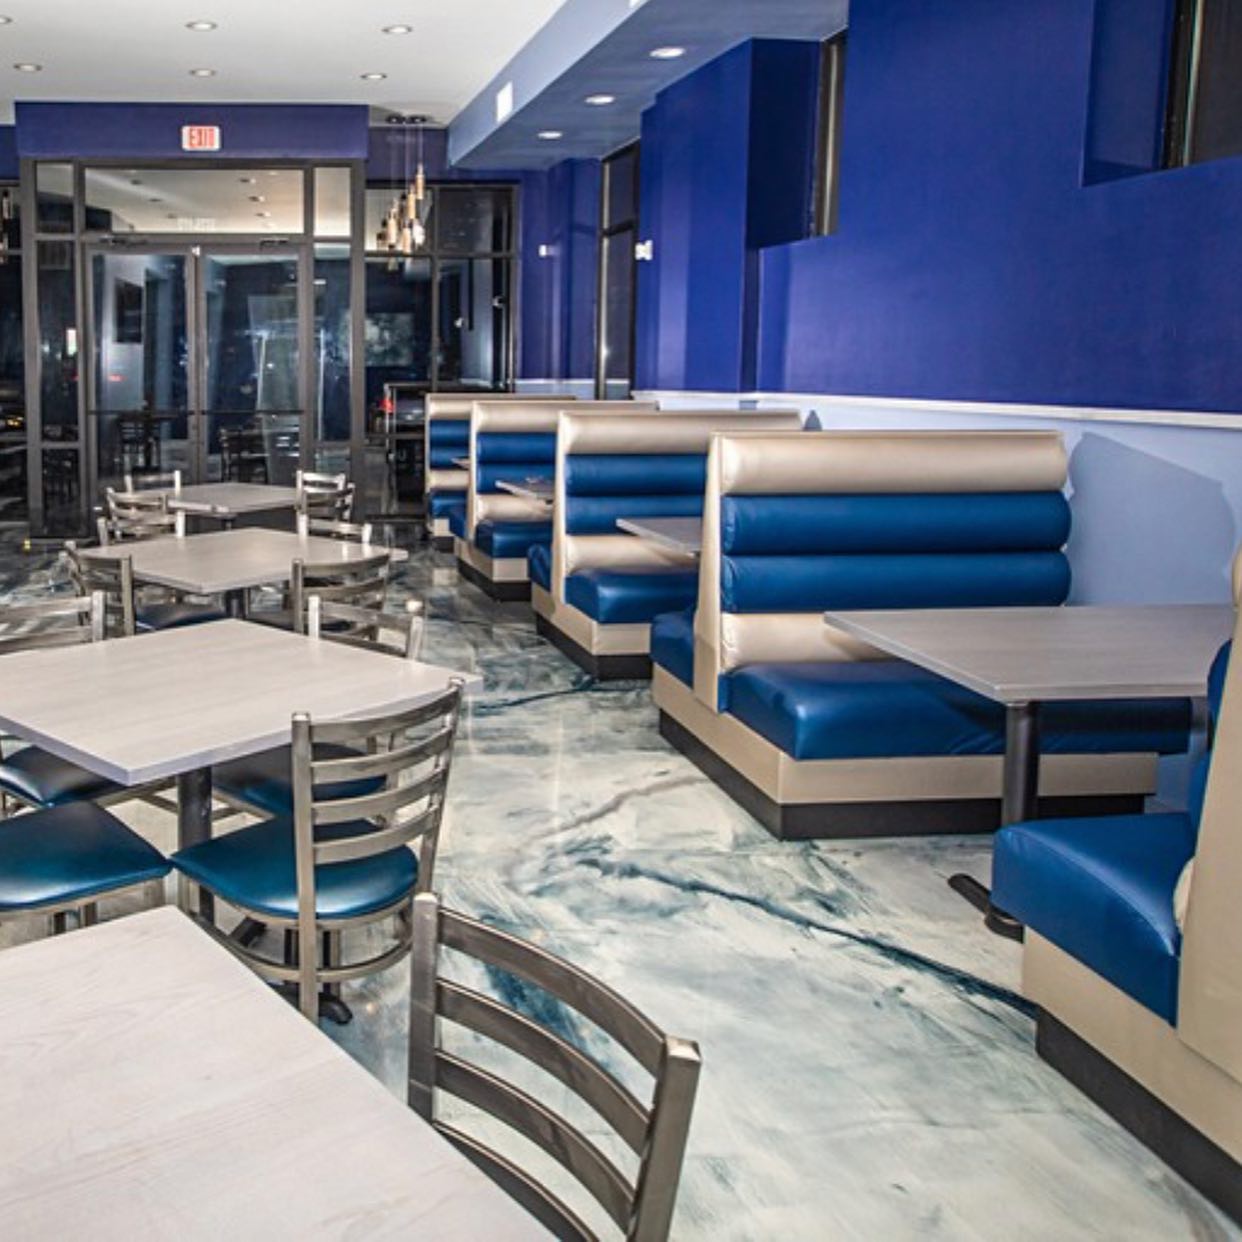 Interior shot of blue and silver themed restaurant at Nouveau Bar and Grill